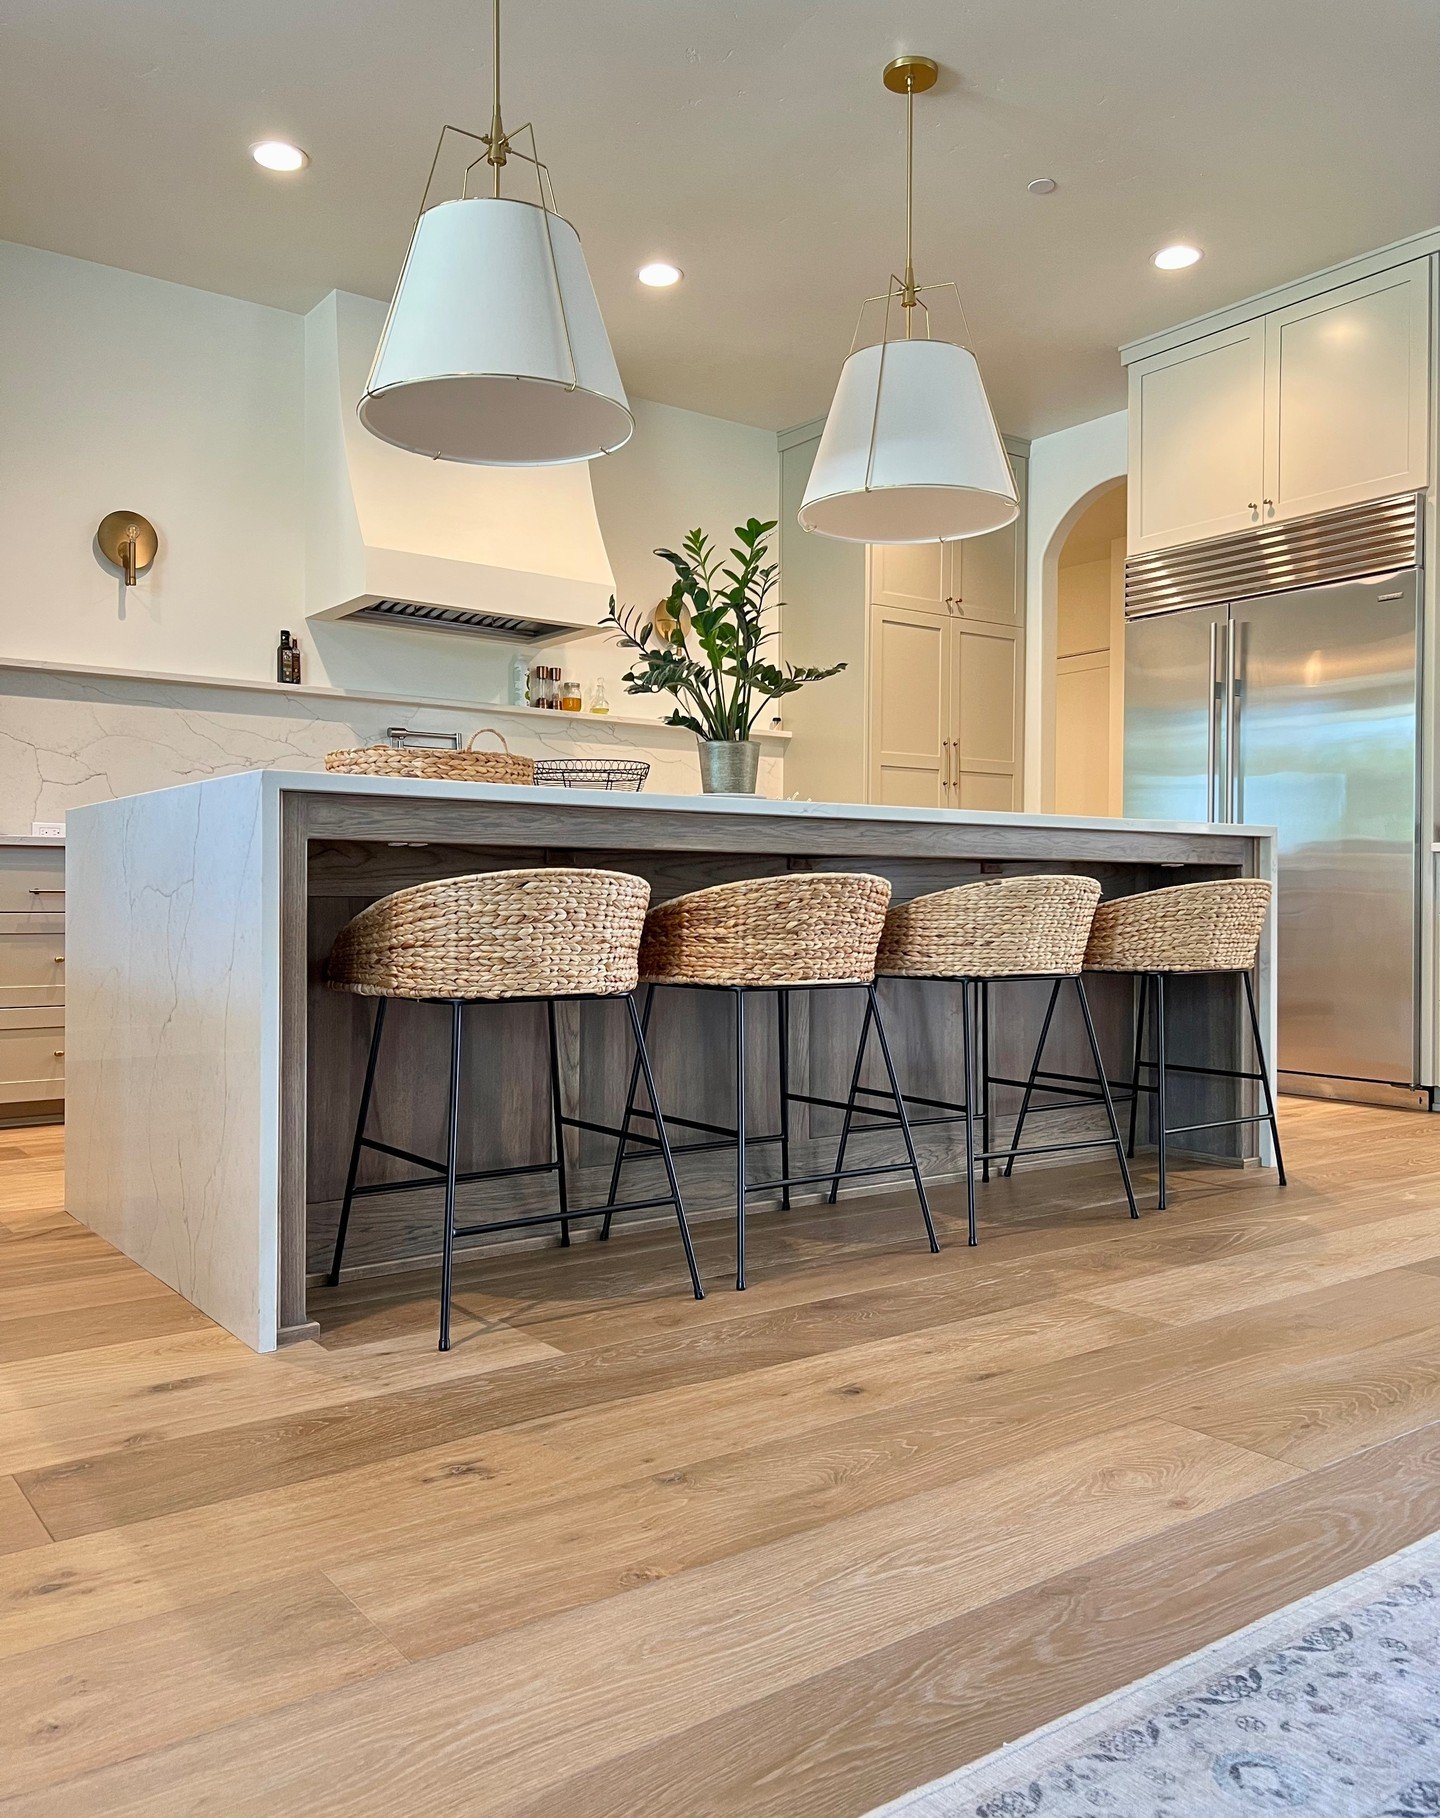 This was a personal favorite of ours! Besides the wonderful hospitality provided, this house was a gorgeous one built by @Northwesthomes and we had the opportunity to install this beautiful hardwood designed by @californiaclassicsfloor. Thank you @No